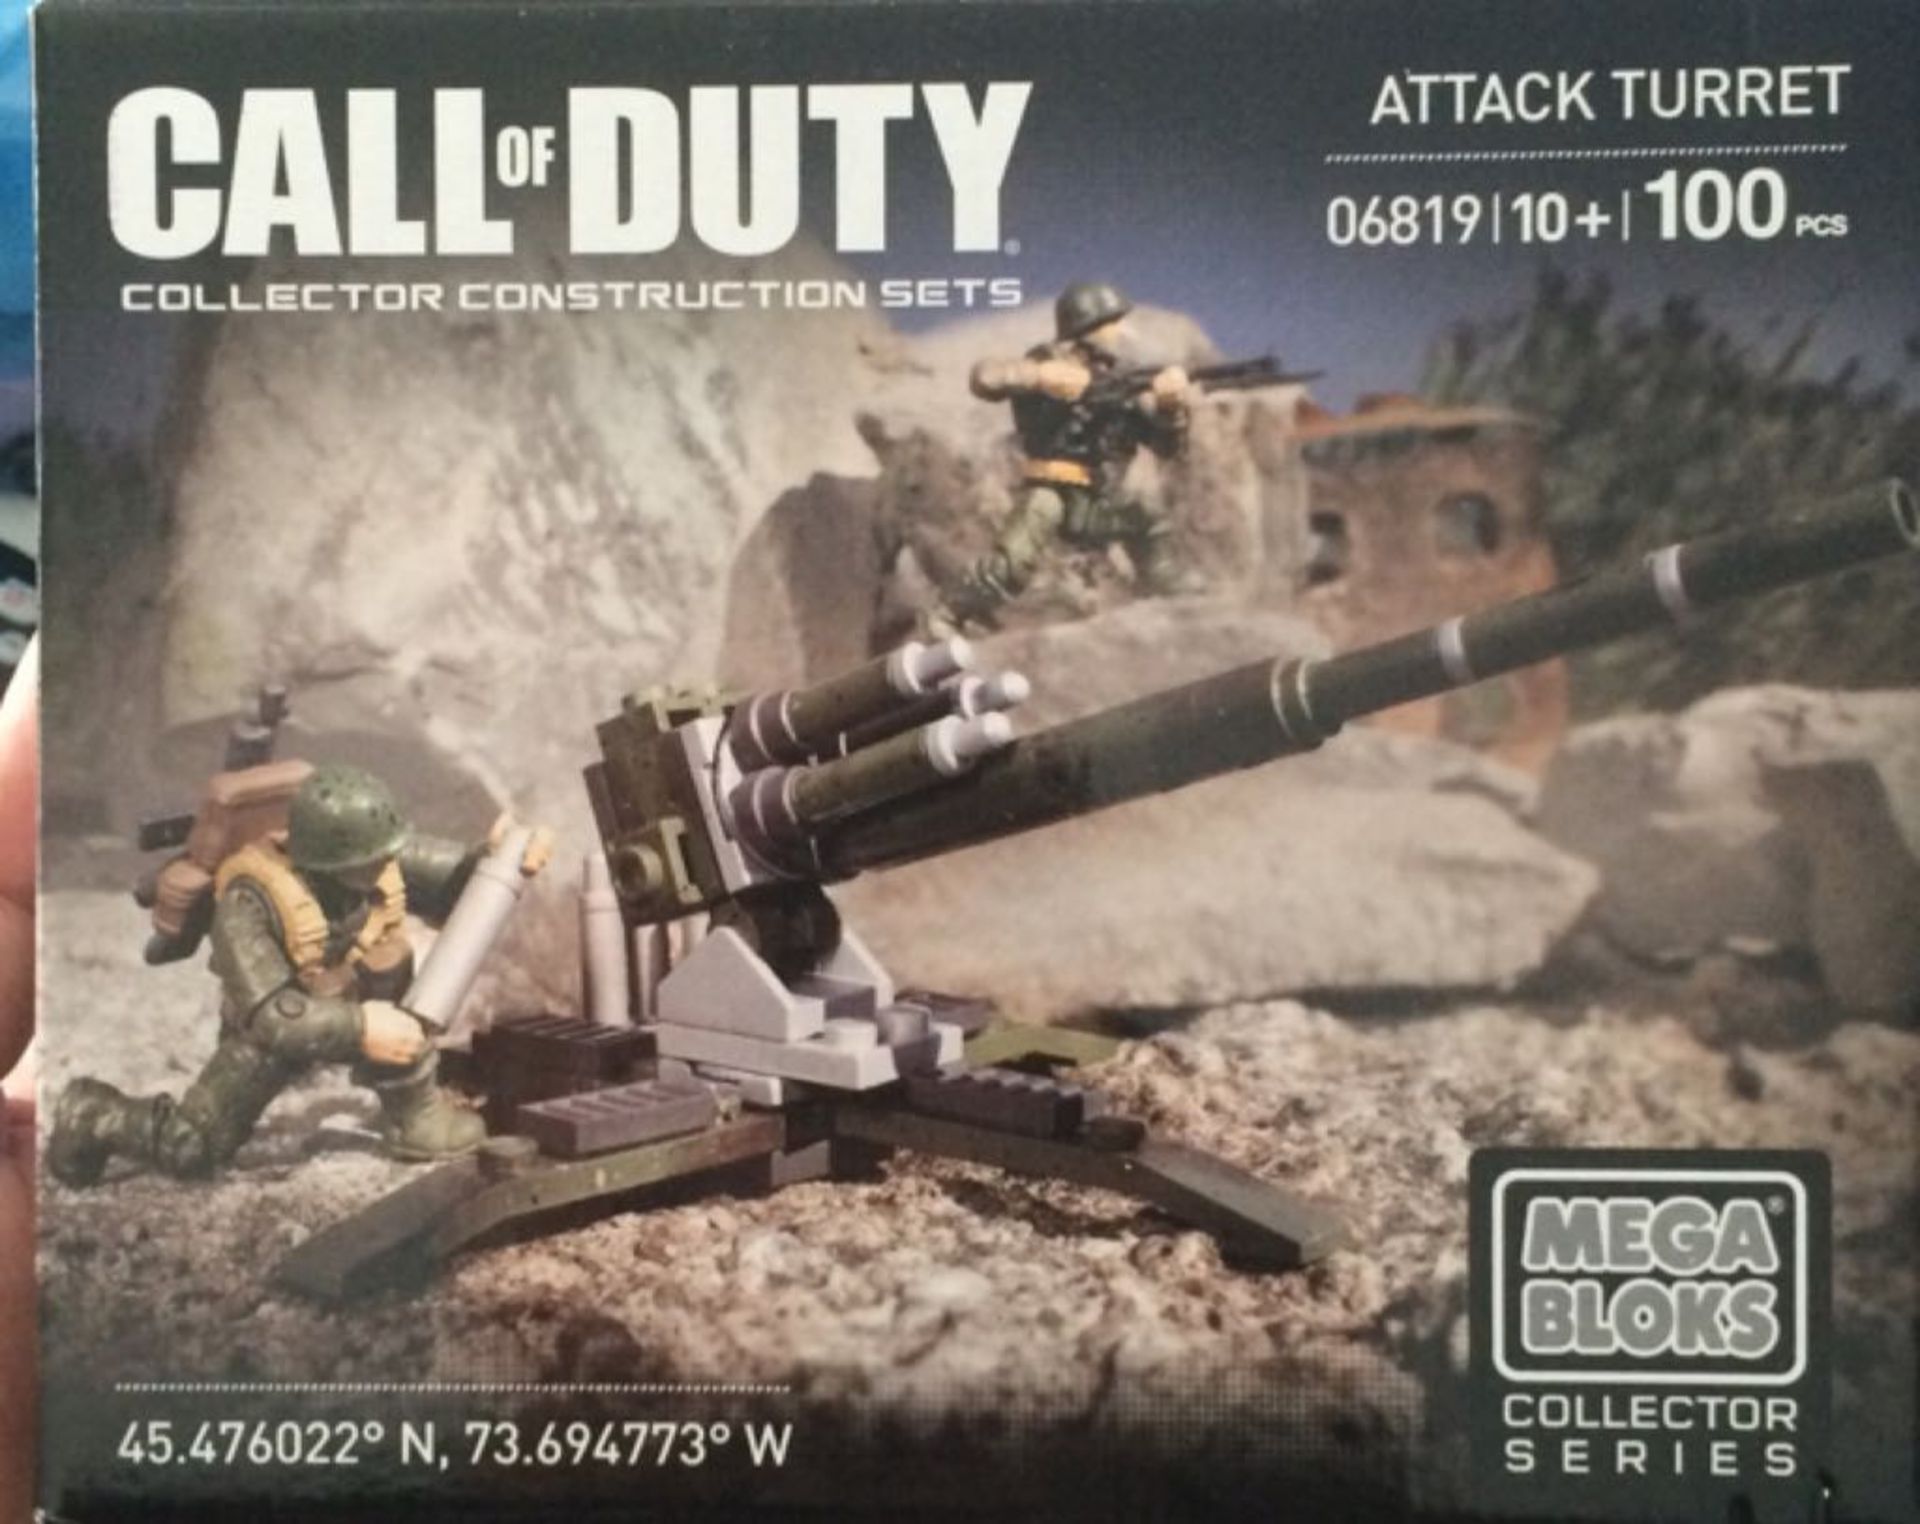 V Brand New Call Of Duty Mega Blocks Collector Series Attack Turrent eBay Price £16.99 X 2 YOUR